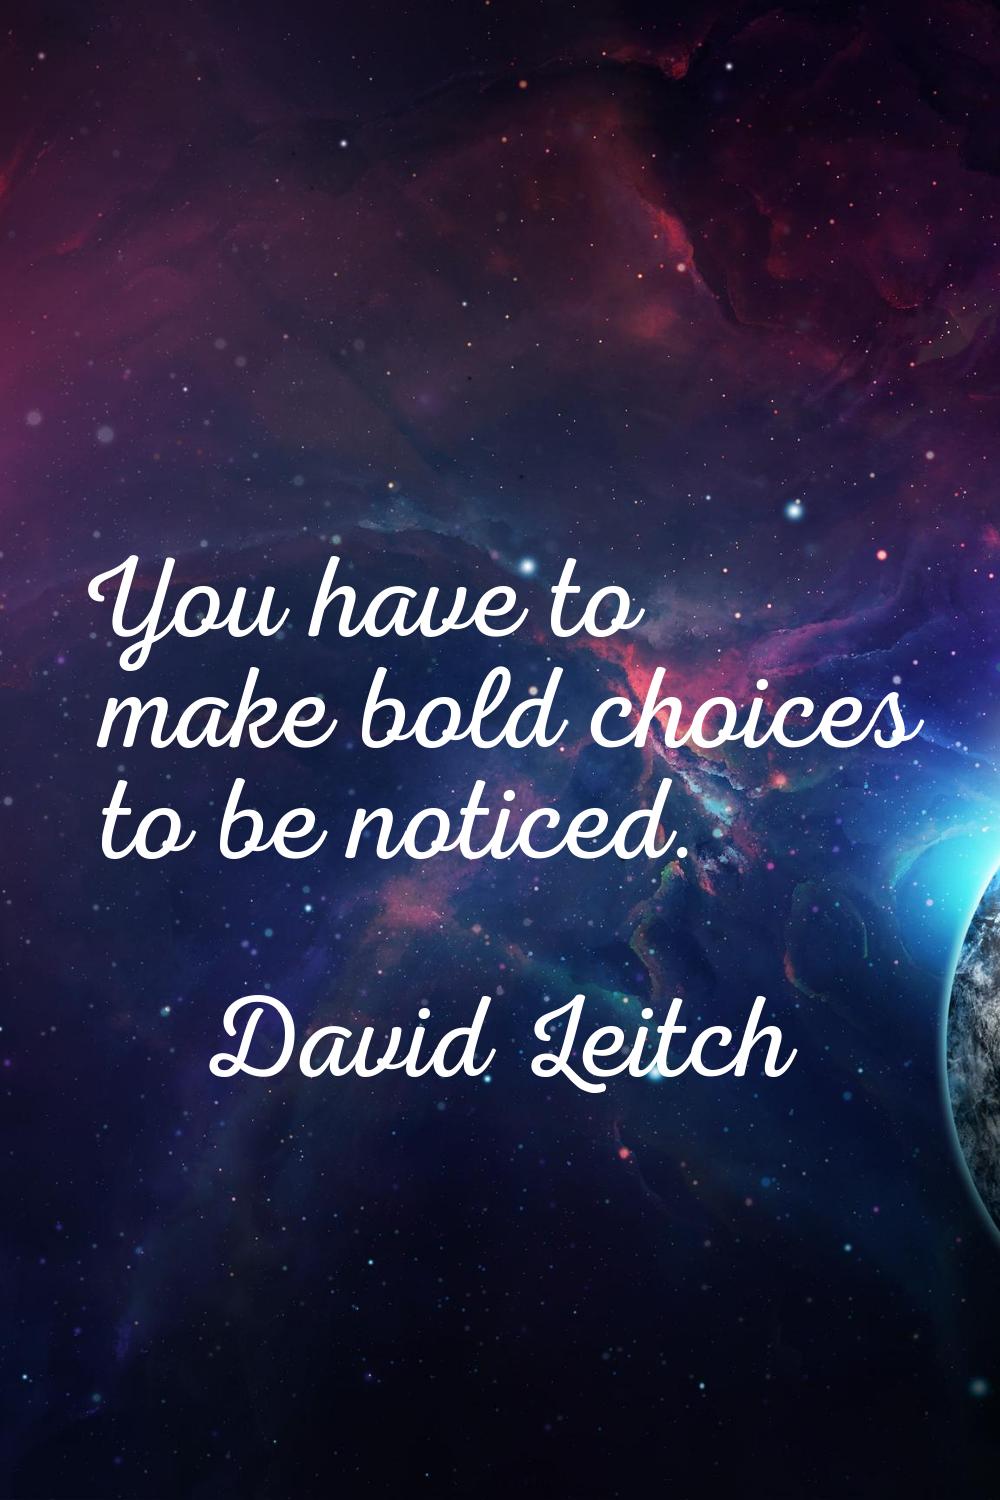 You have to make bold choices to be noticed.